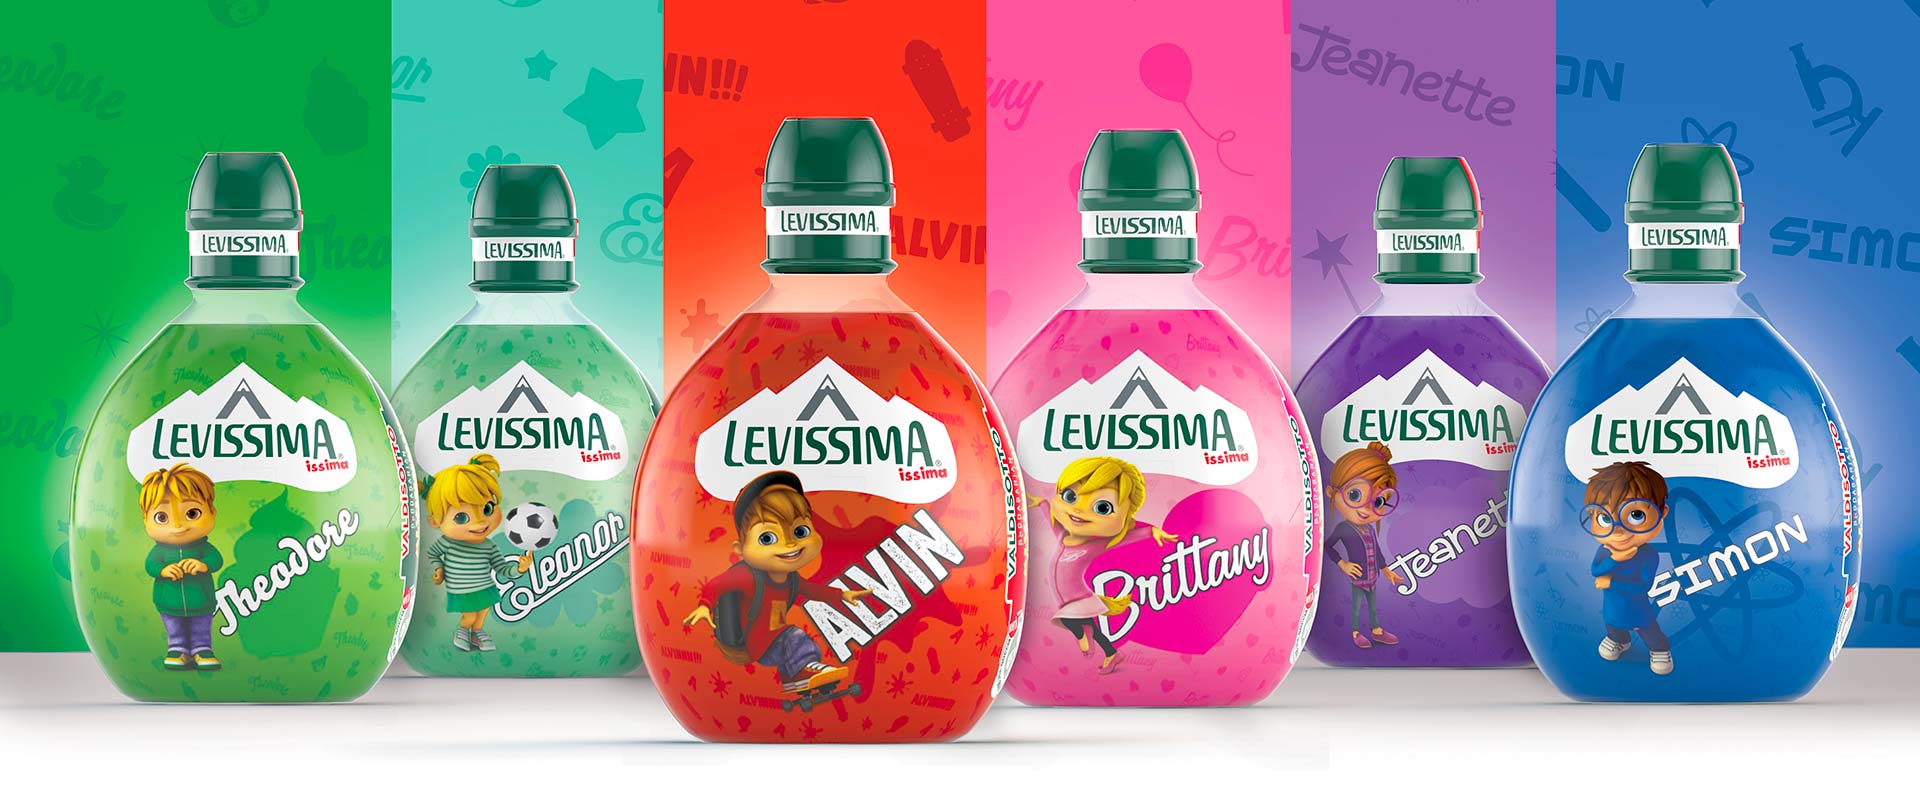 packaging licensing for Levissima Issima